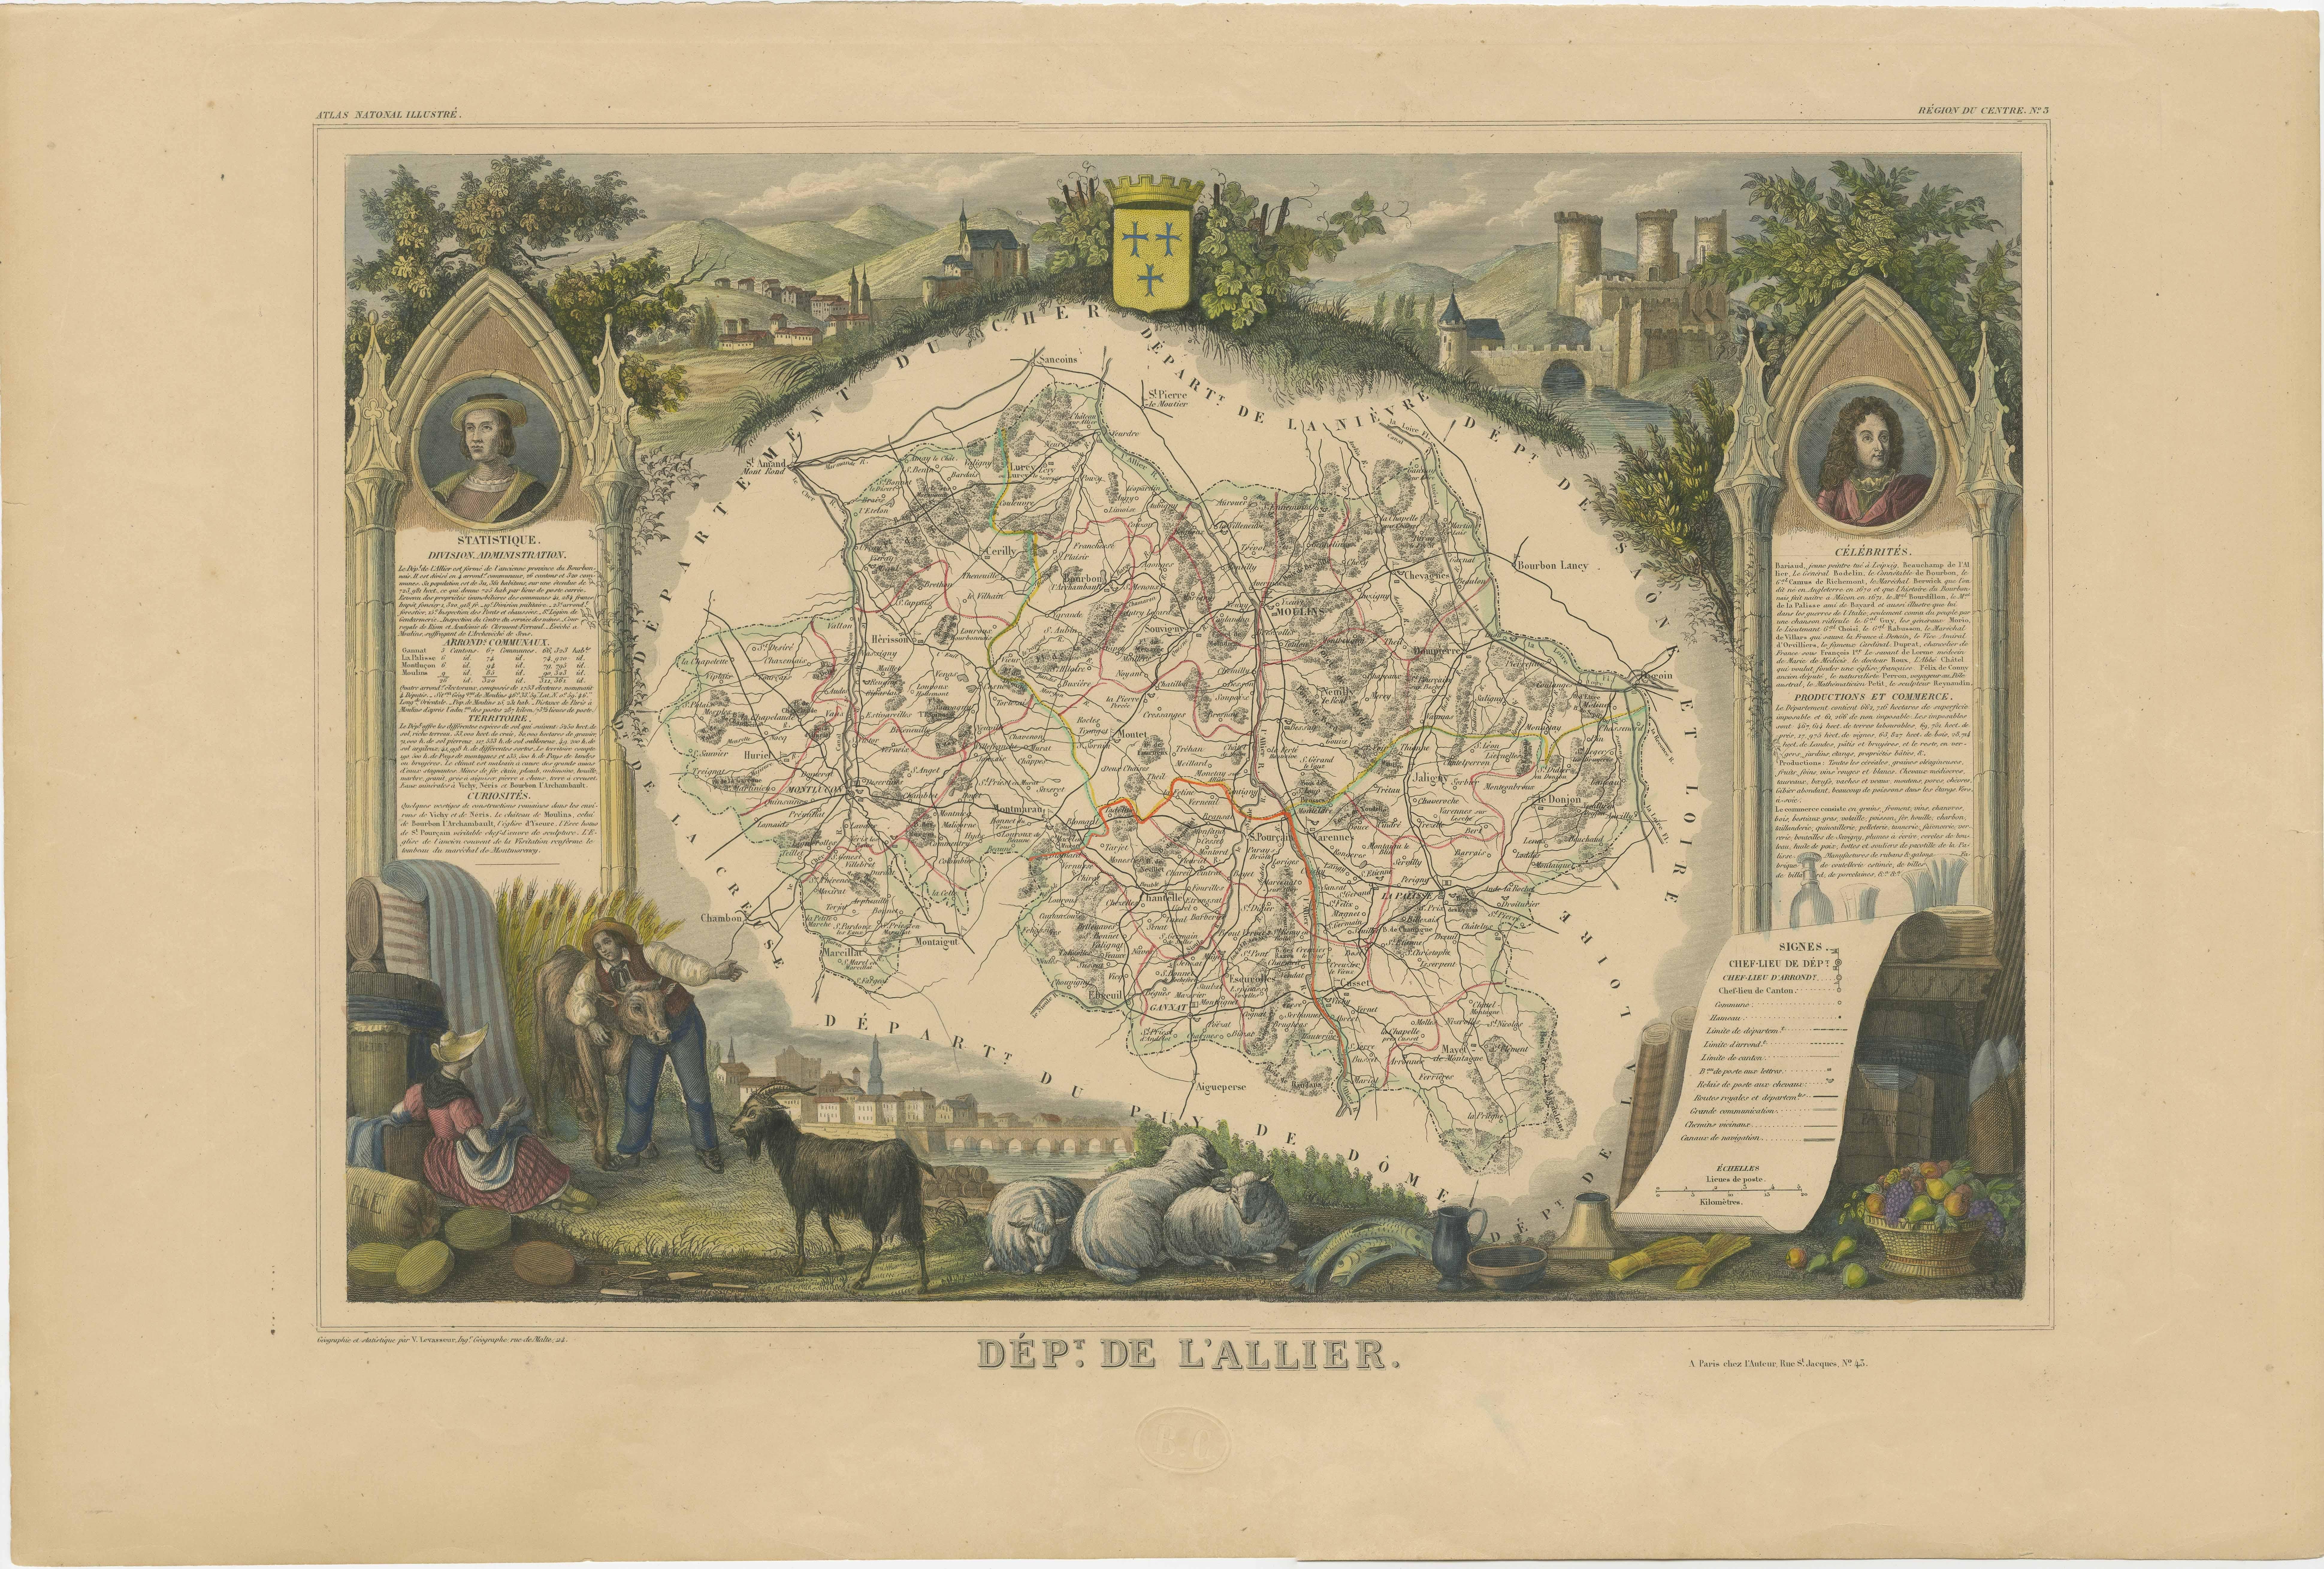 Antique map titled 'Dept. De L'Allier'. Map of the French department of l'Allier, France. This area of France is known for its production of Saint-Pourçain wine. It is also one of the rare places in Southern Europe where the freshwater grayling